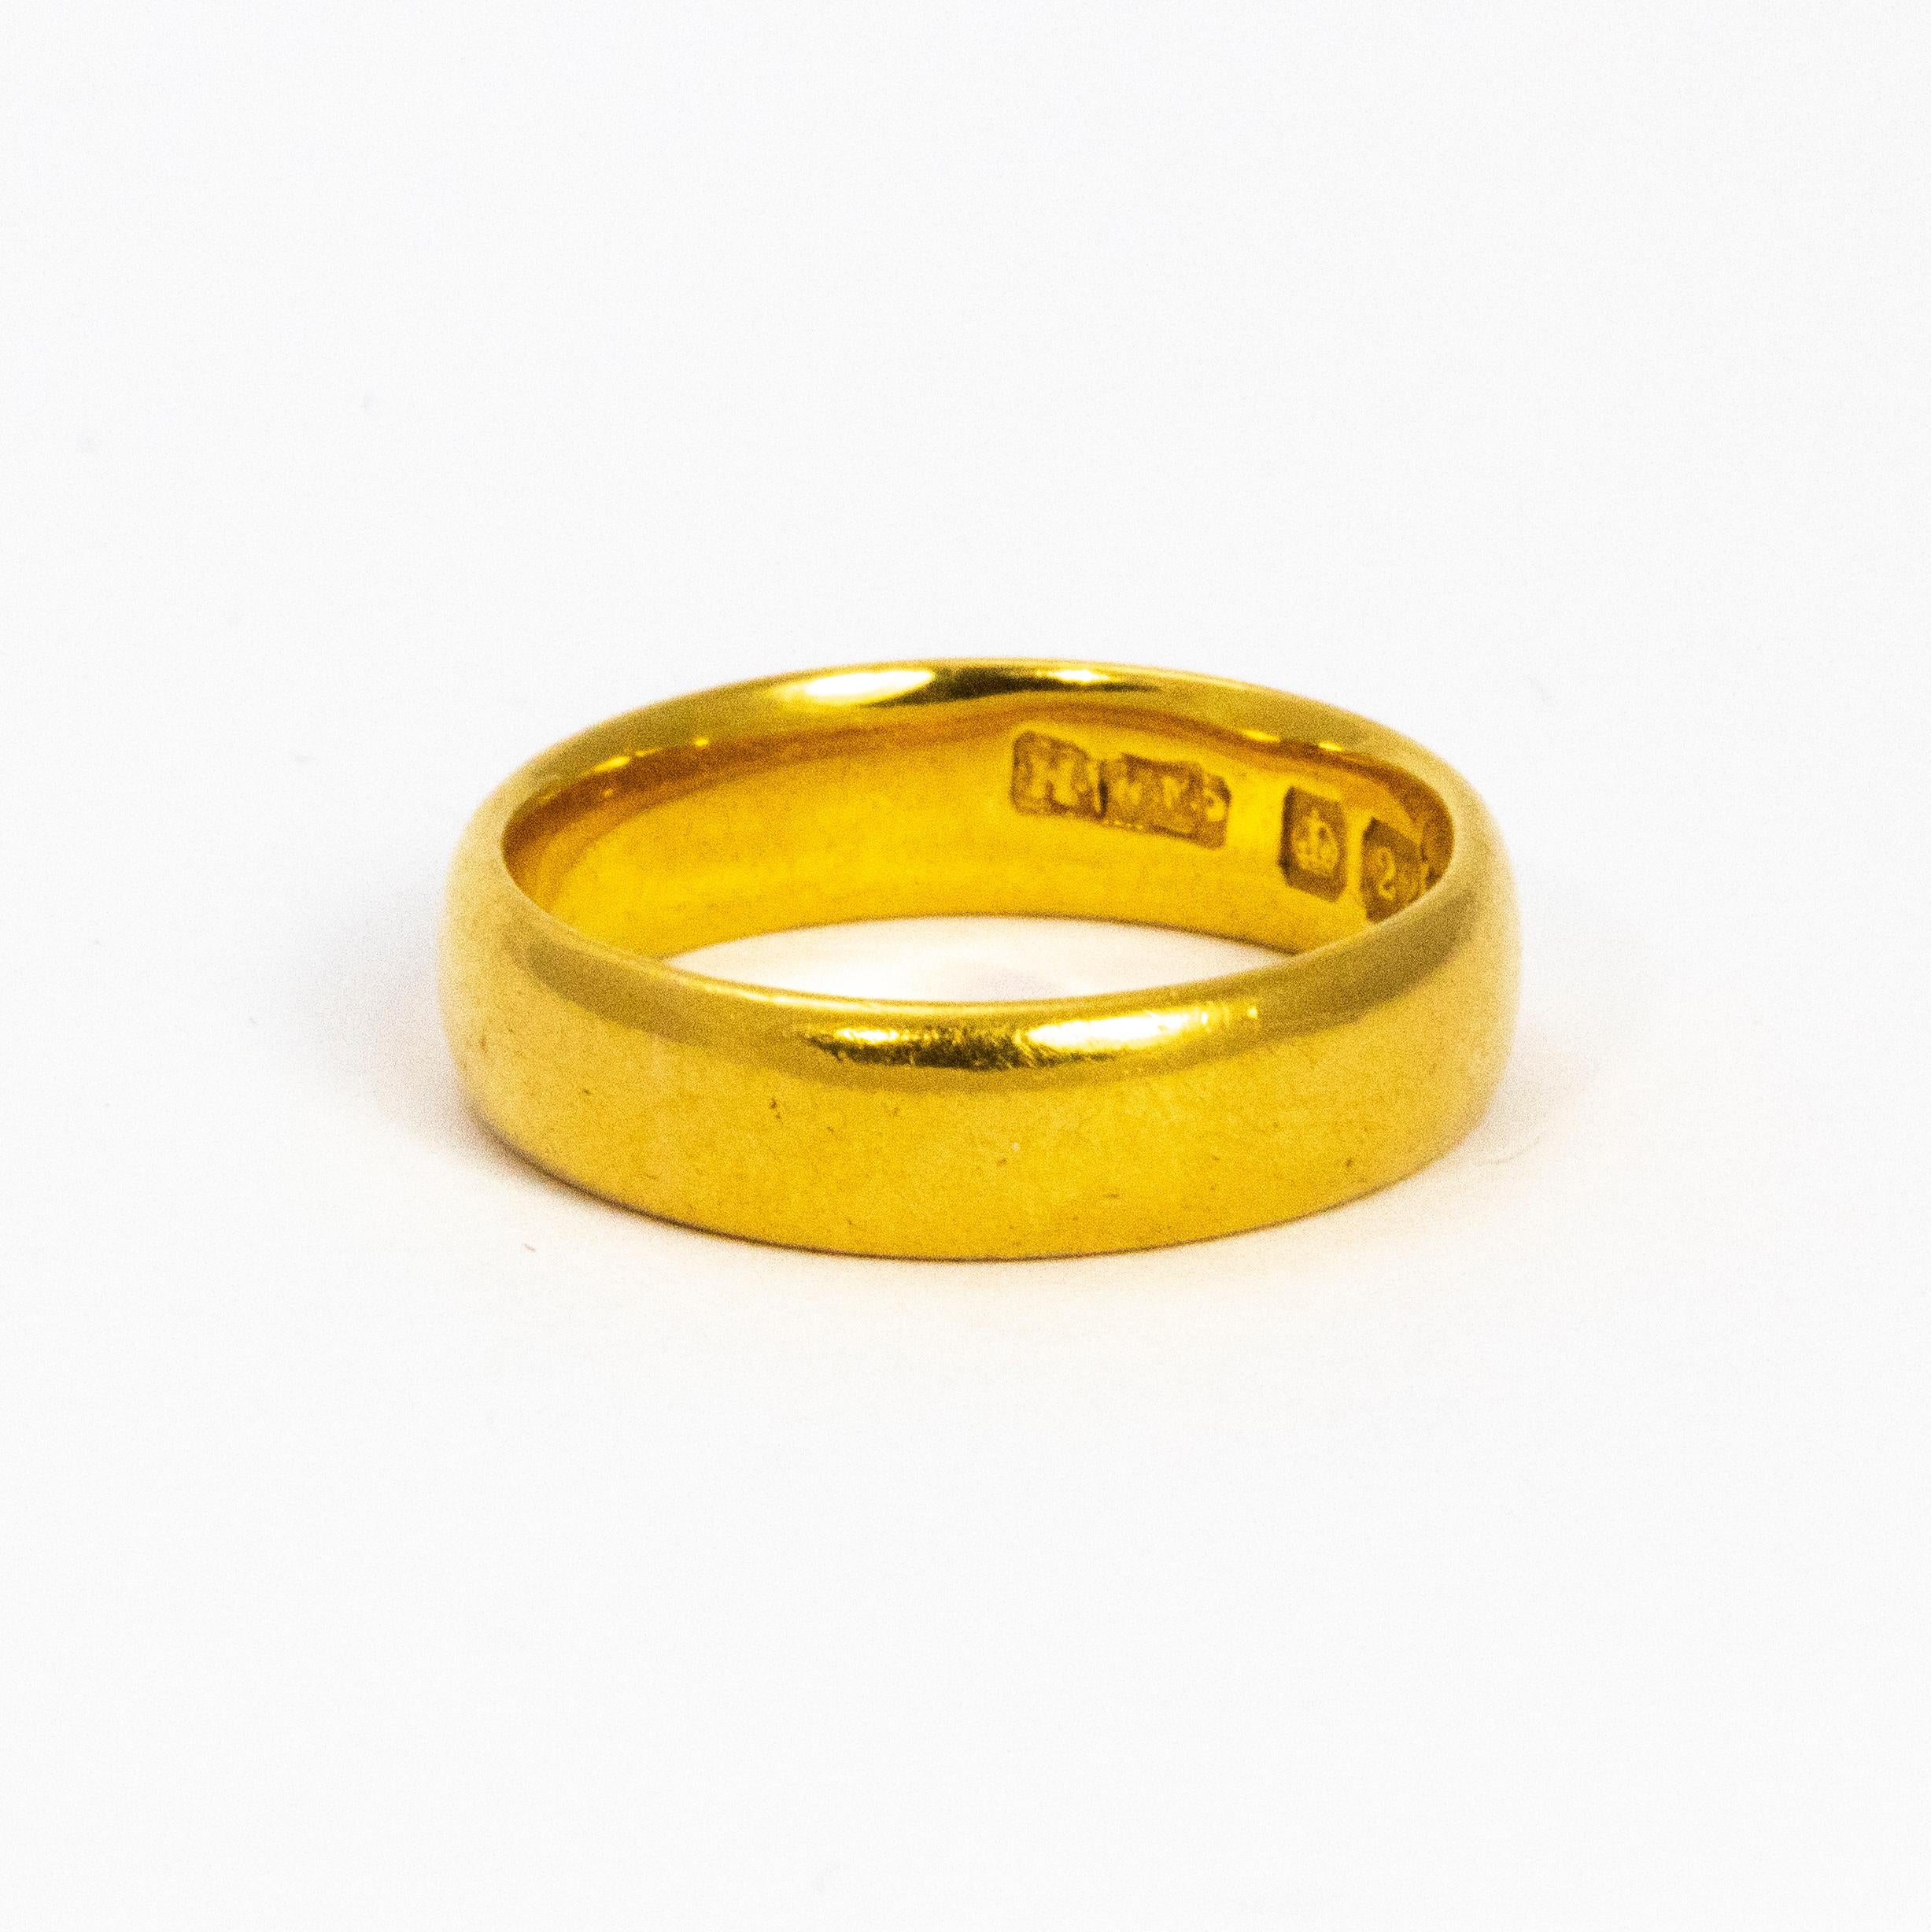 Never going out of fashion, this classic 22ct gold band measures approx 4mm wide and would make a perfect wedding band or a simple everyday ring.

Ring Size: J or 4 3/4